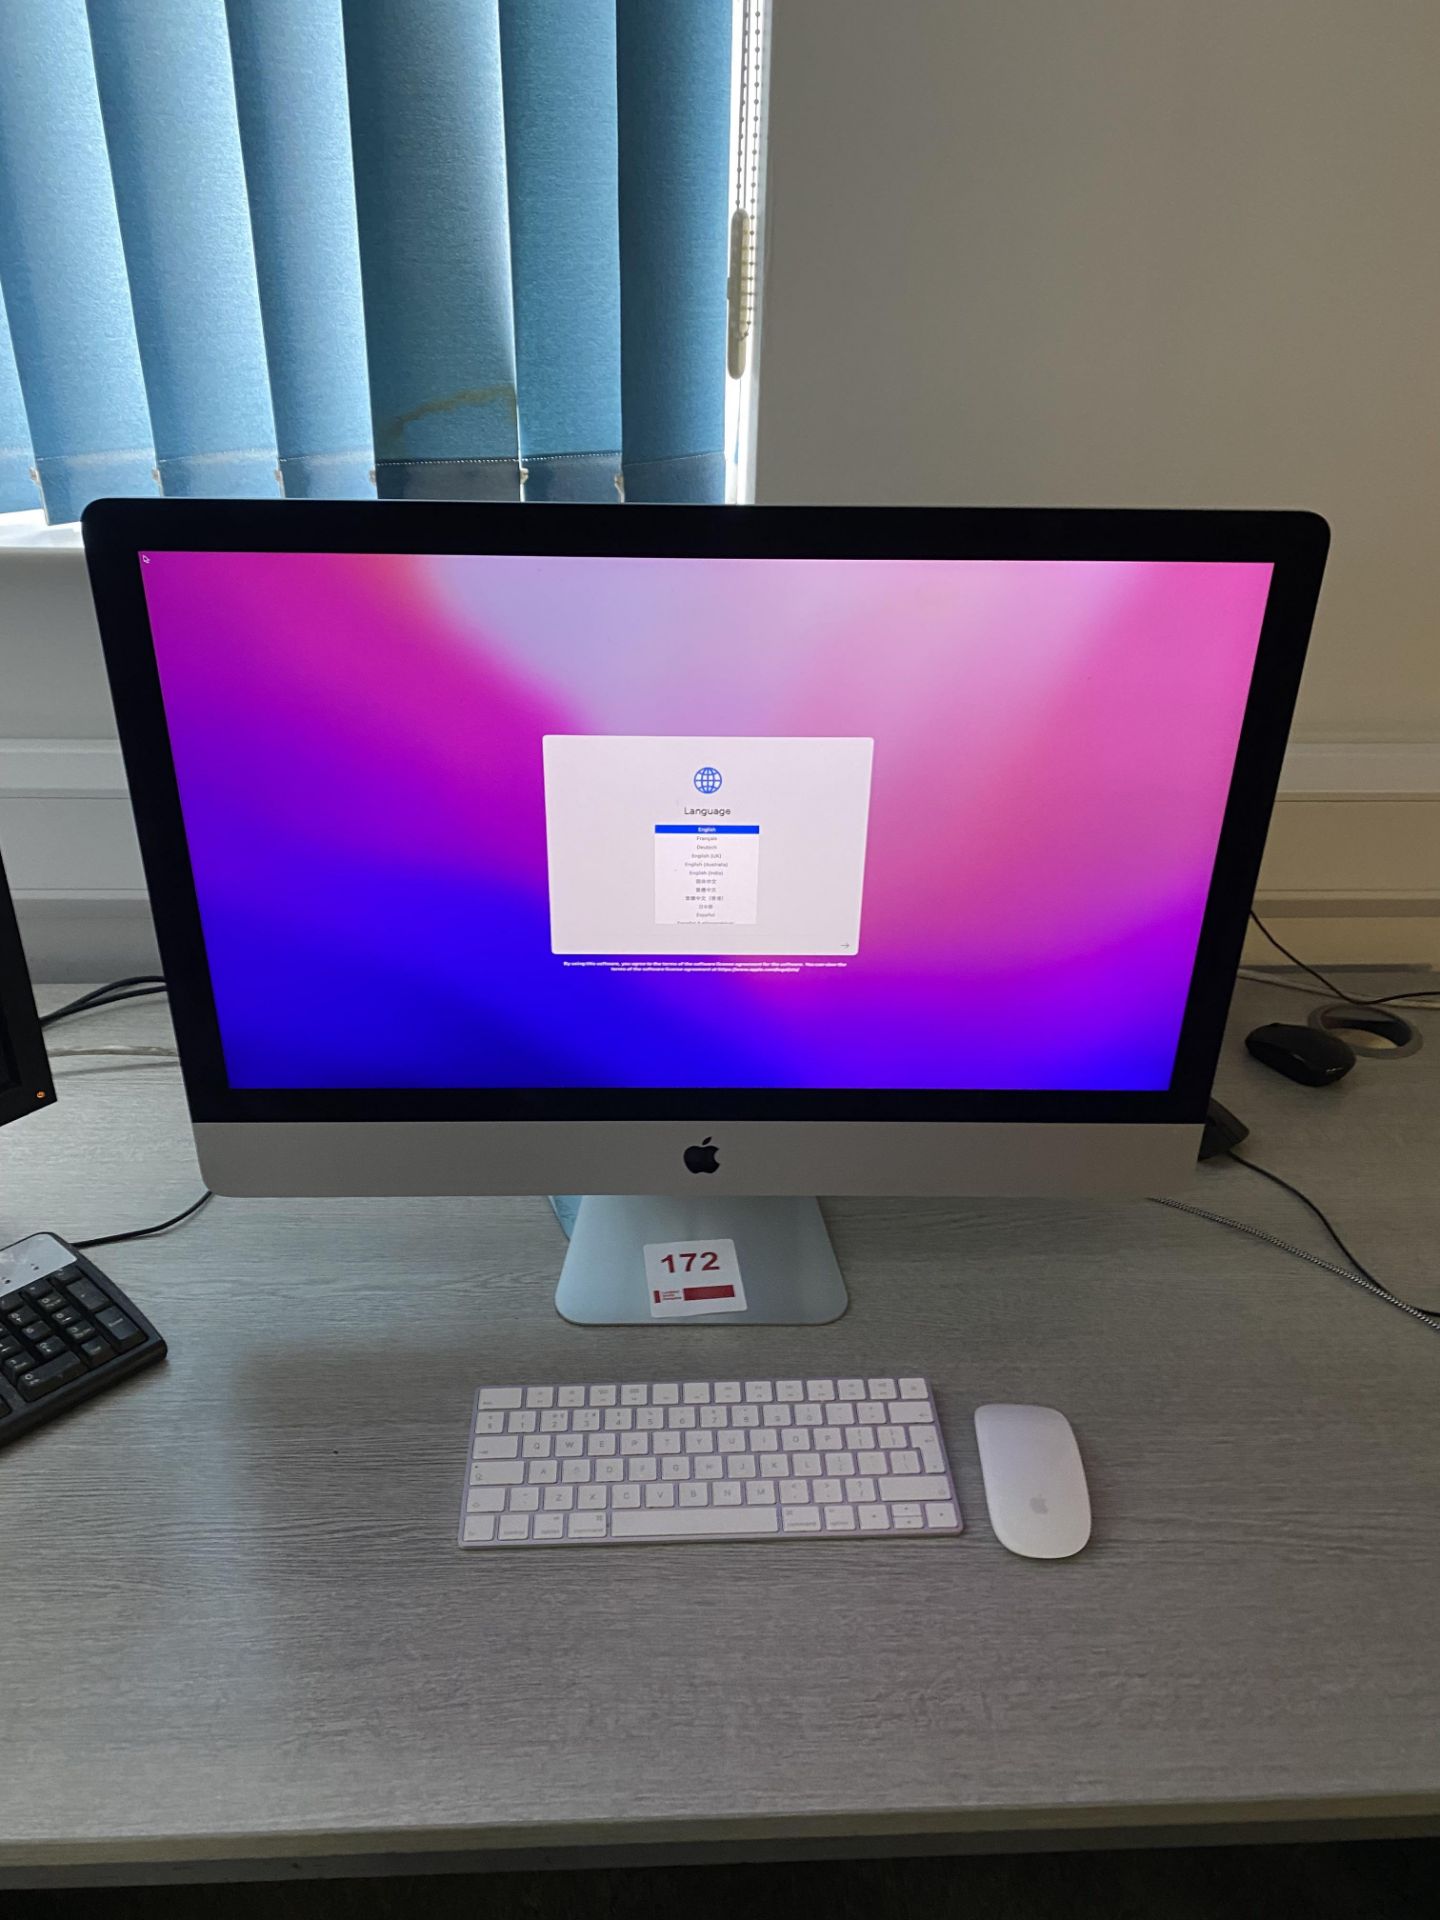 Apple desktop computer/monitor, with keyboard & mouse